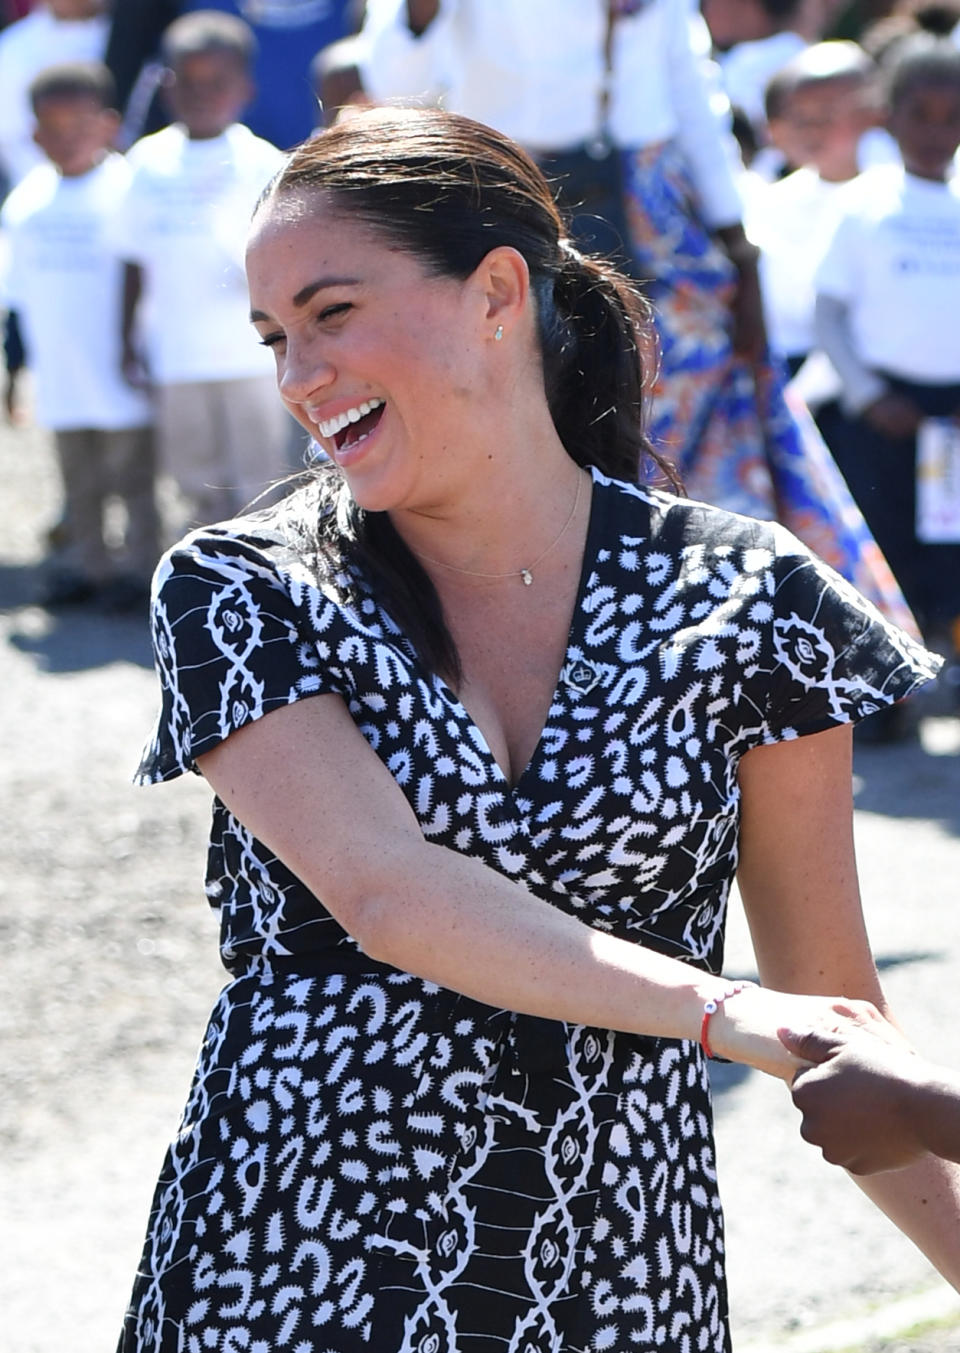 The Duchess of Sussex joins in with dancers as she leaves the Nyanga Township in Cape Town, South Africa, on the first day of their tour of Africa.